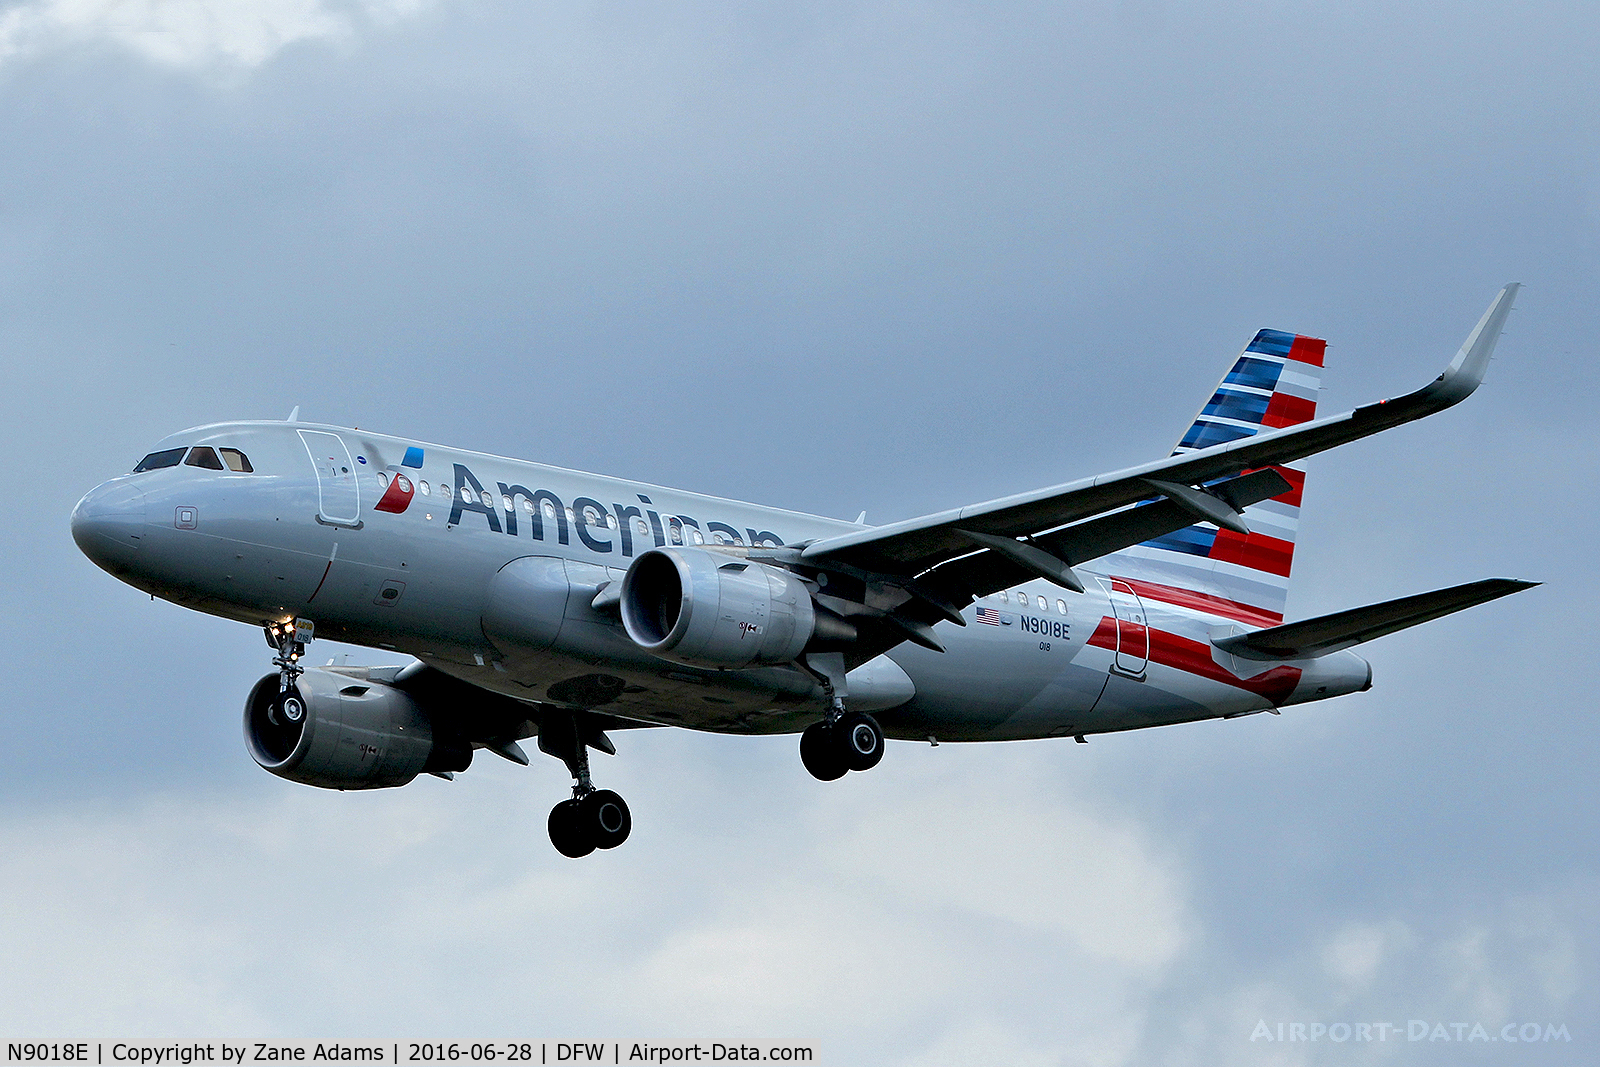 N9018E, 2014 Airbus A319-112 C/N 6150, Arriving at DFW Airport